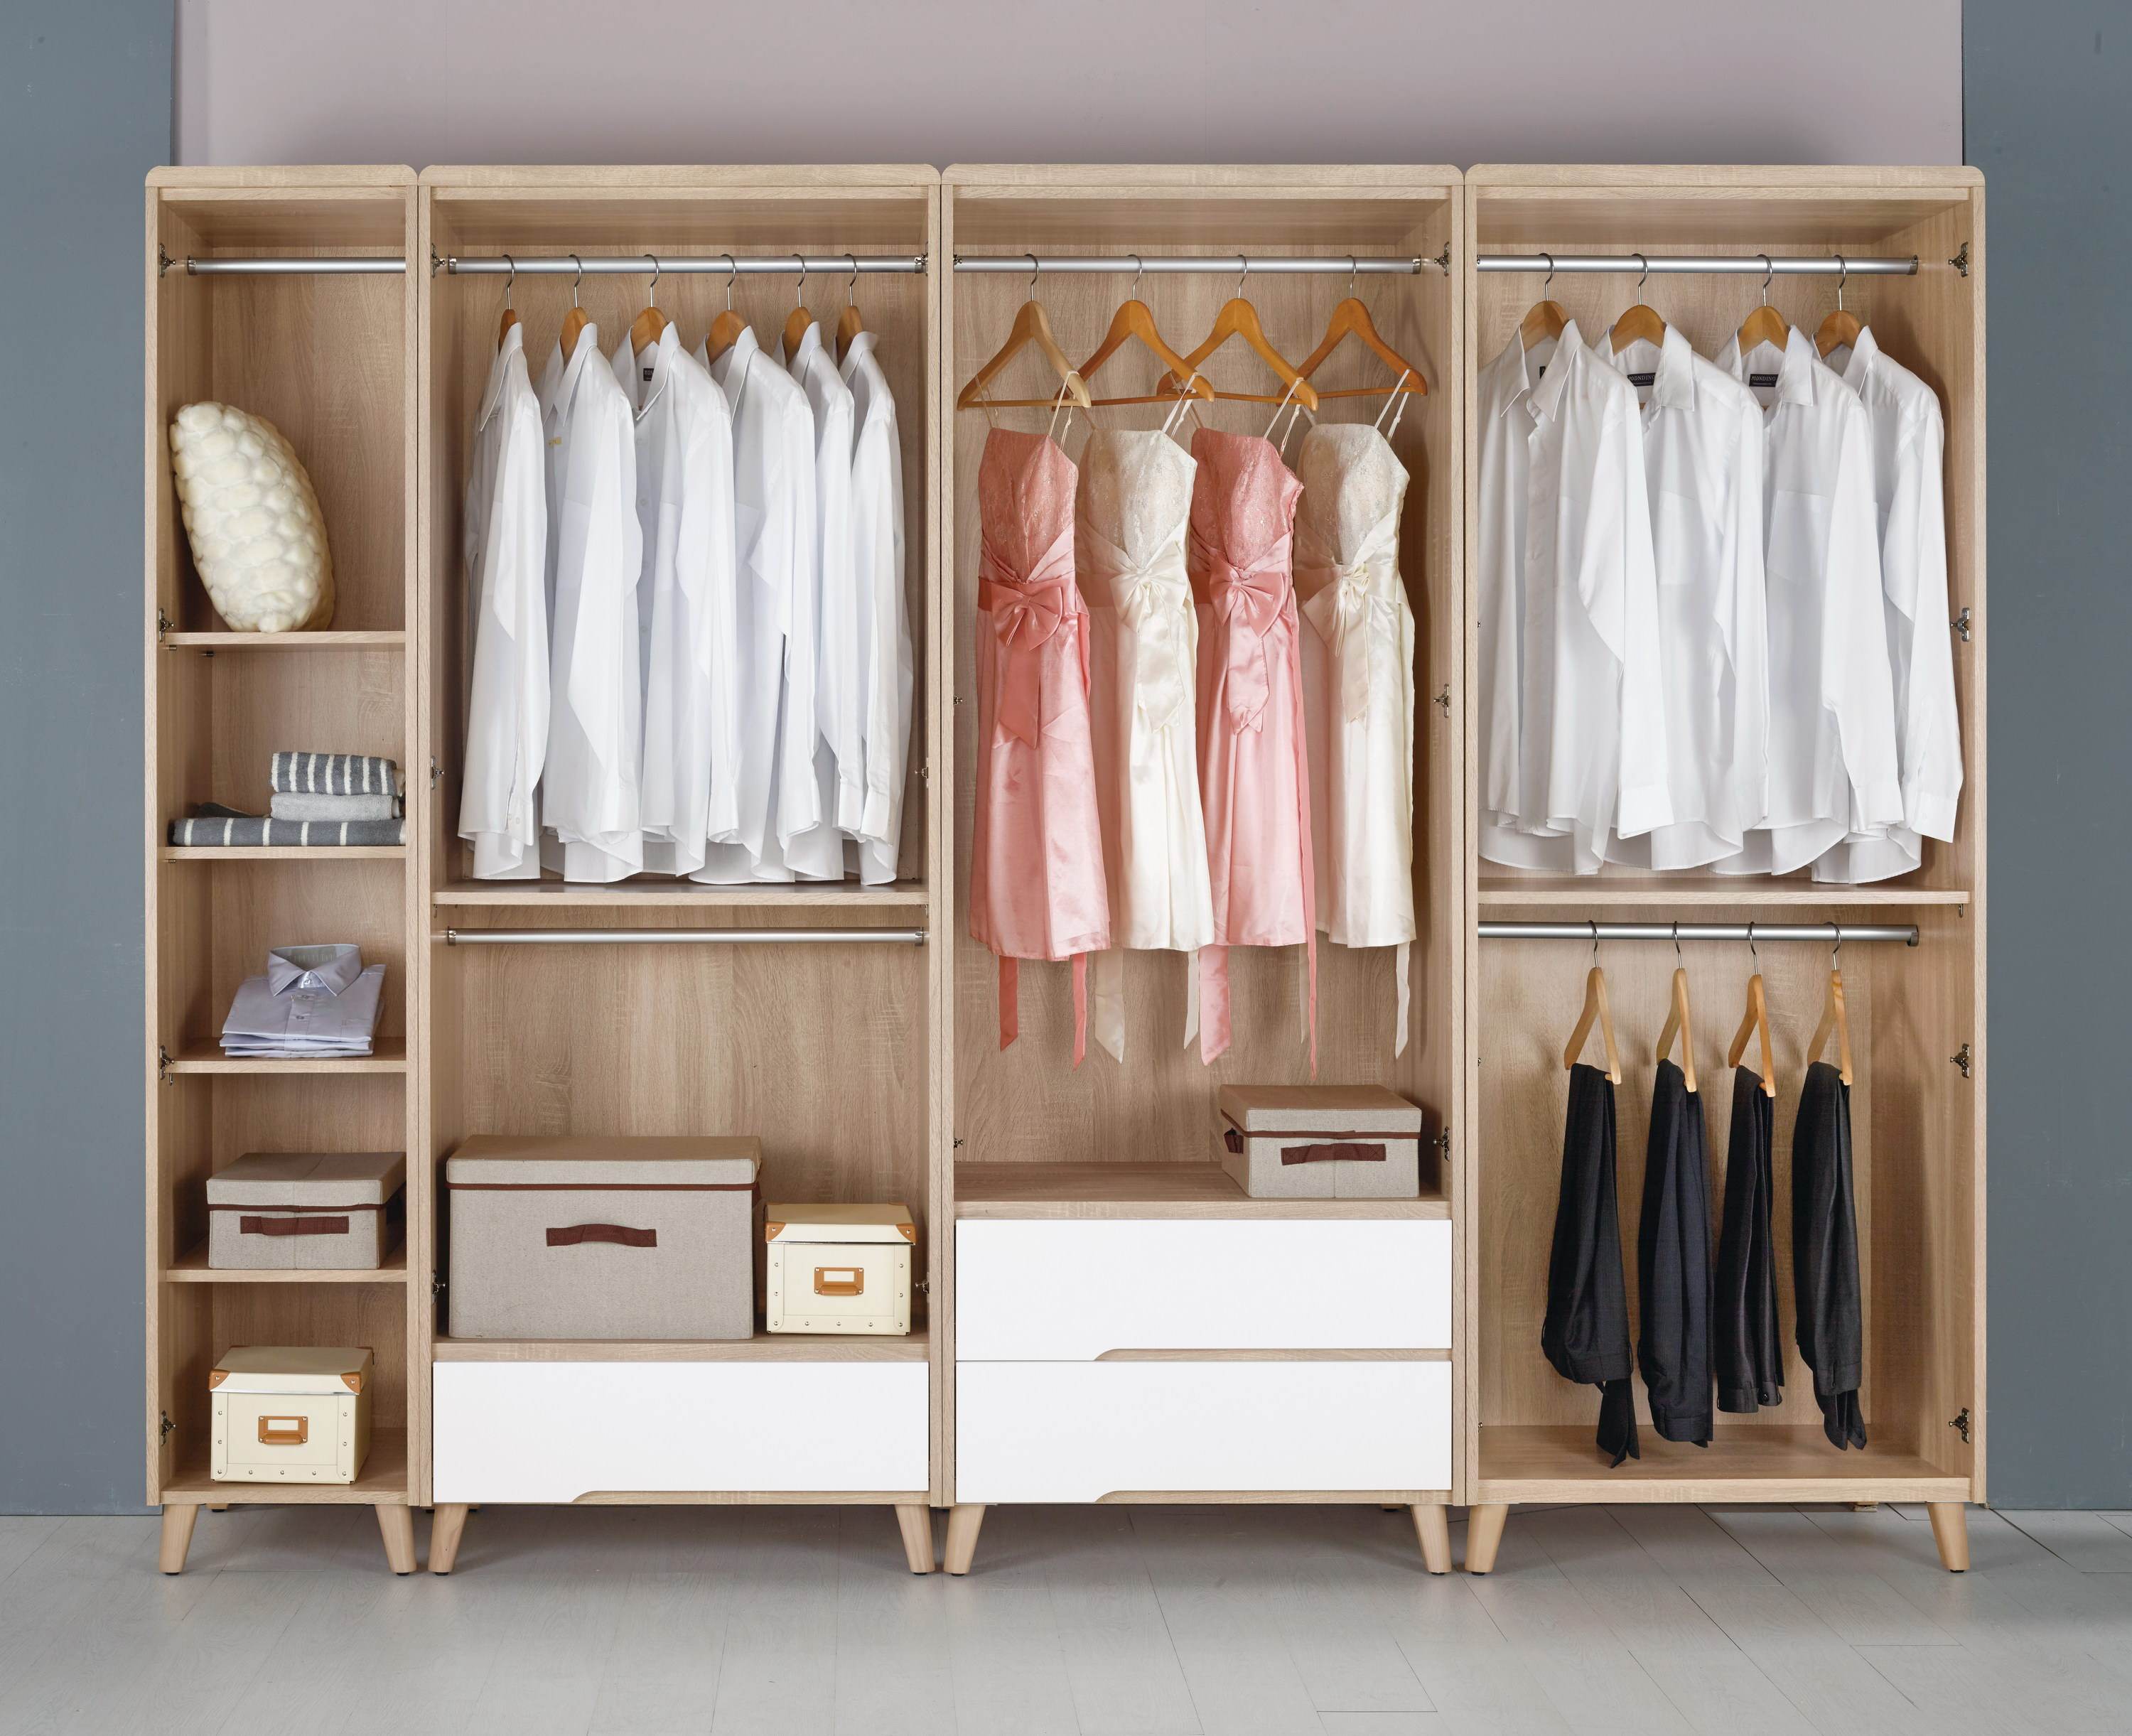 What is the appropriate depth of the wardrobe? Increase the depth of ...